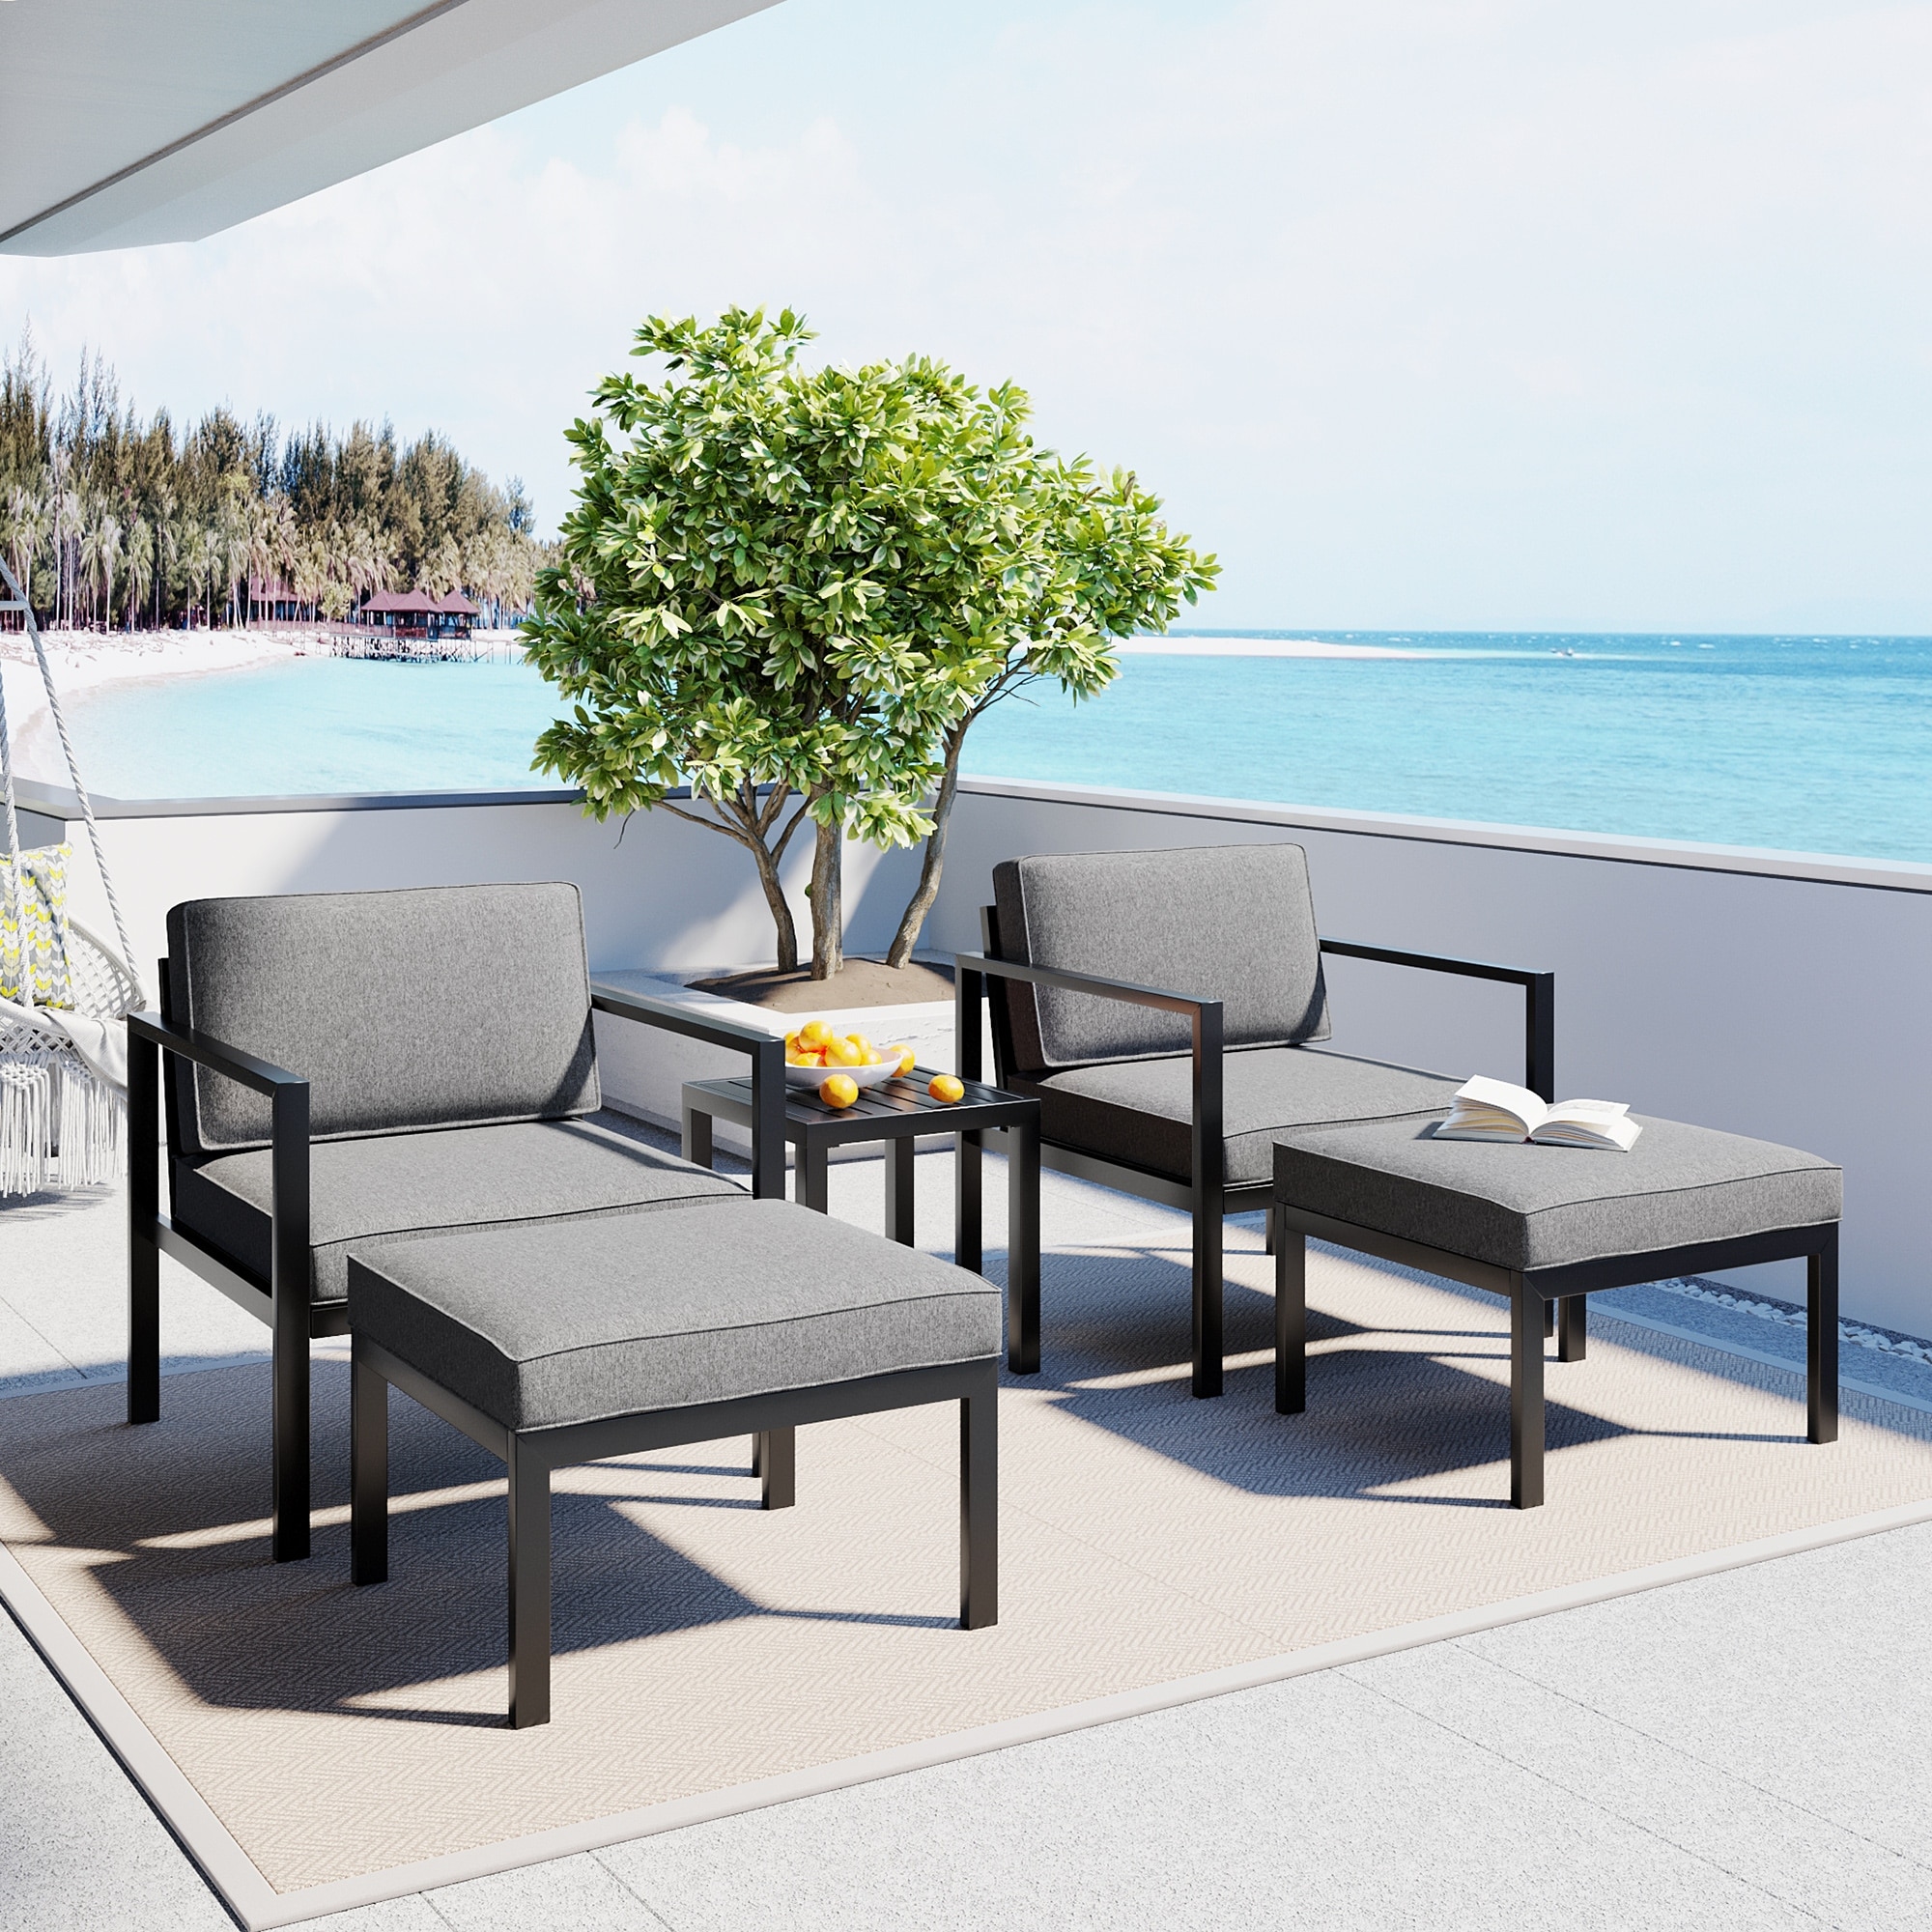 Stylish Aluminum Alloy Outdoor Conversation Sectional Sofa Set With Coffee Table  Black Frame  Gray Cushions